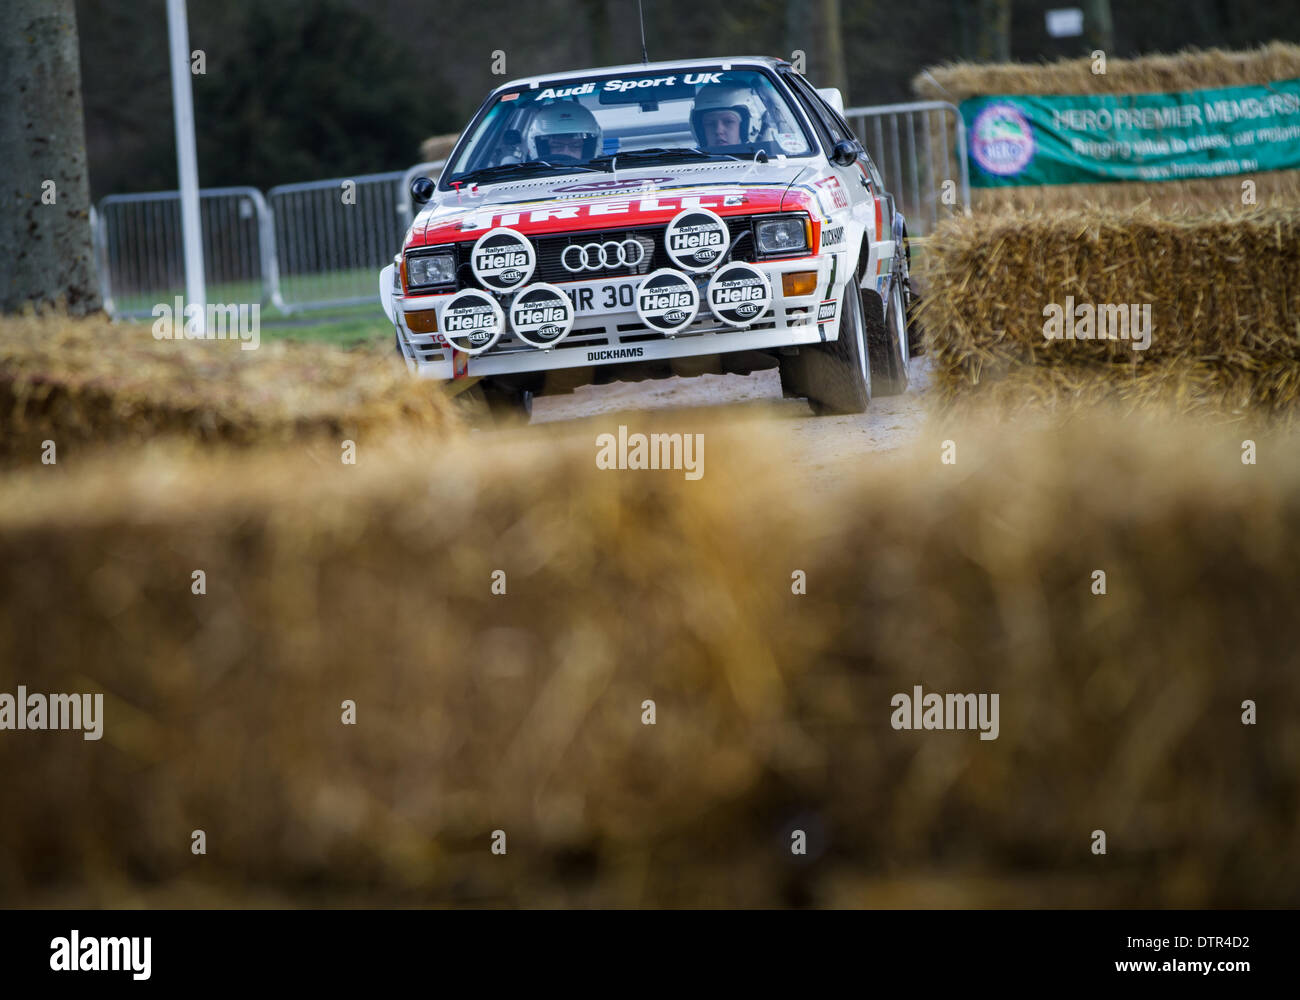 Stoneleigh Park, Coventry, UK. 22nd Feb, 2014. Race Retro Live rally stages at Stoneleigh park featuring classic B class rally cars from Audi,Ford,Ferrari,MG and various other manufacturers Credit:  steven roe/Alamy Live News Stock Photo